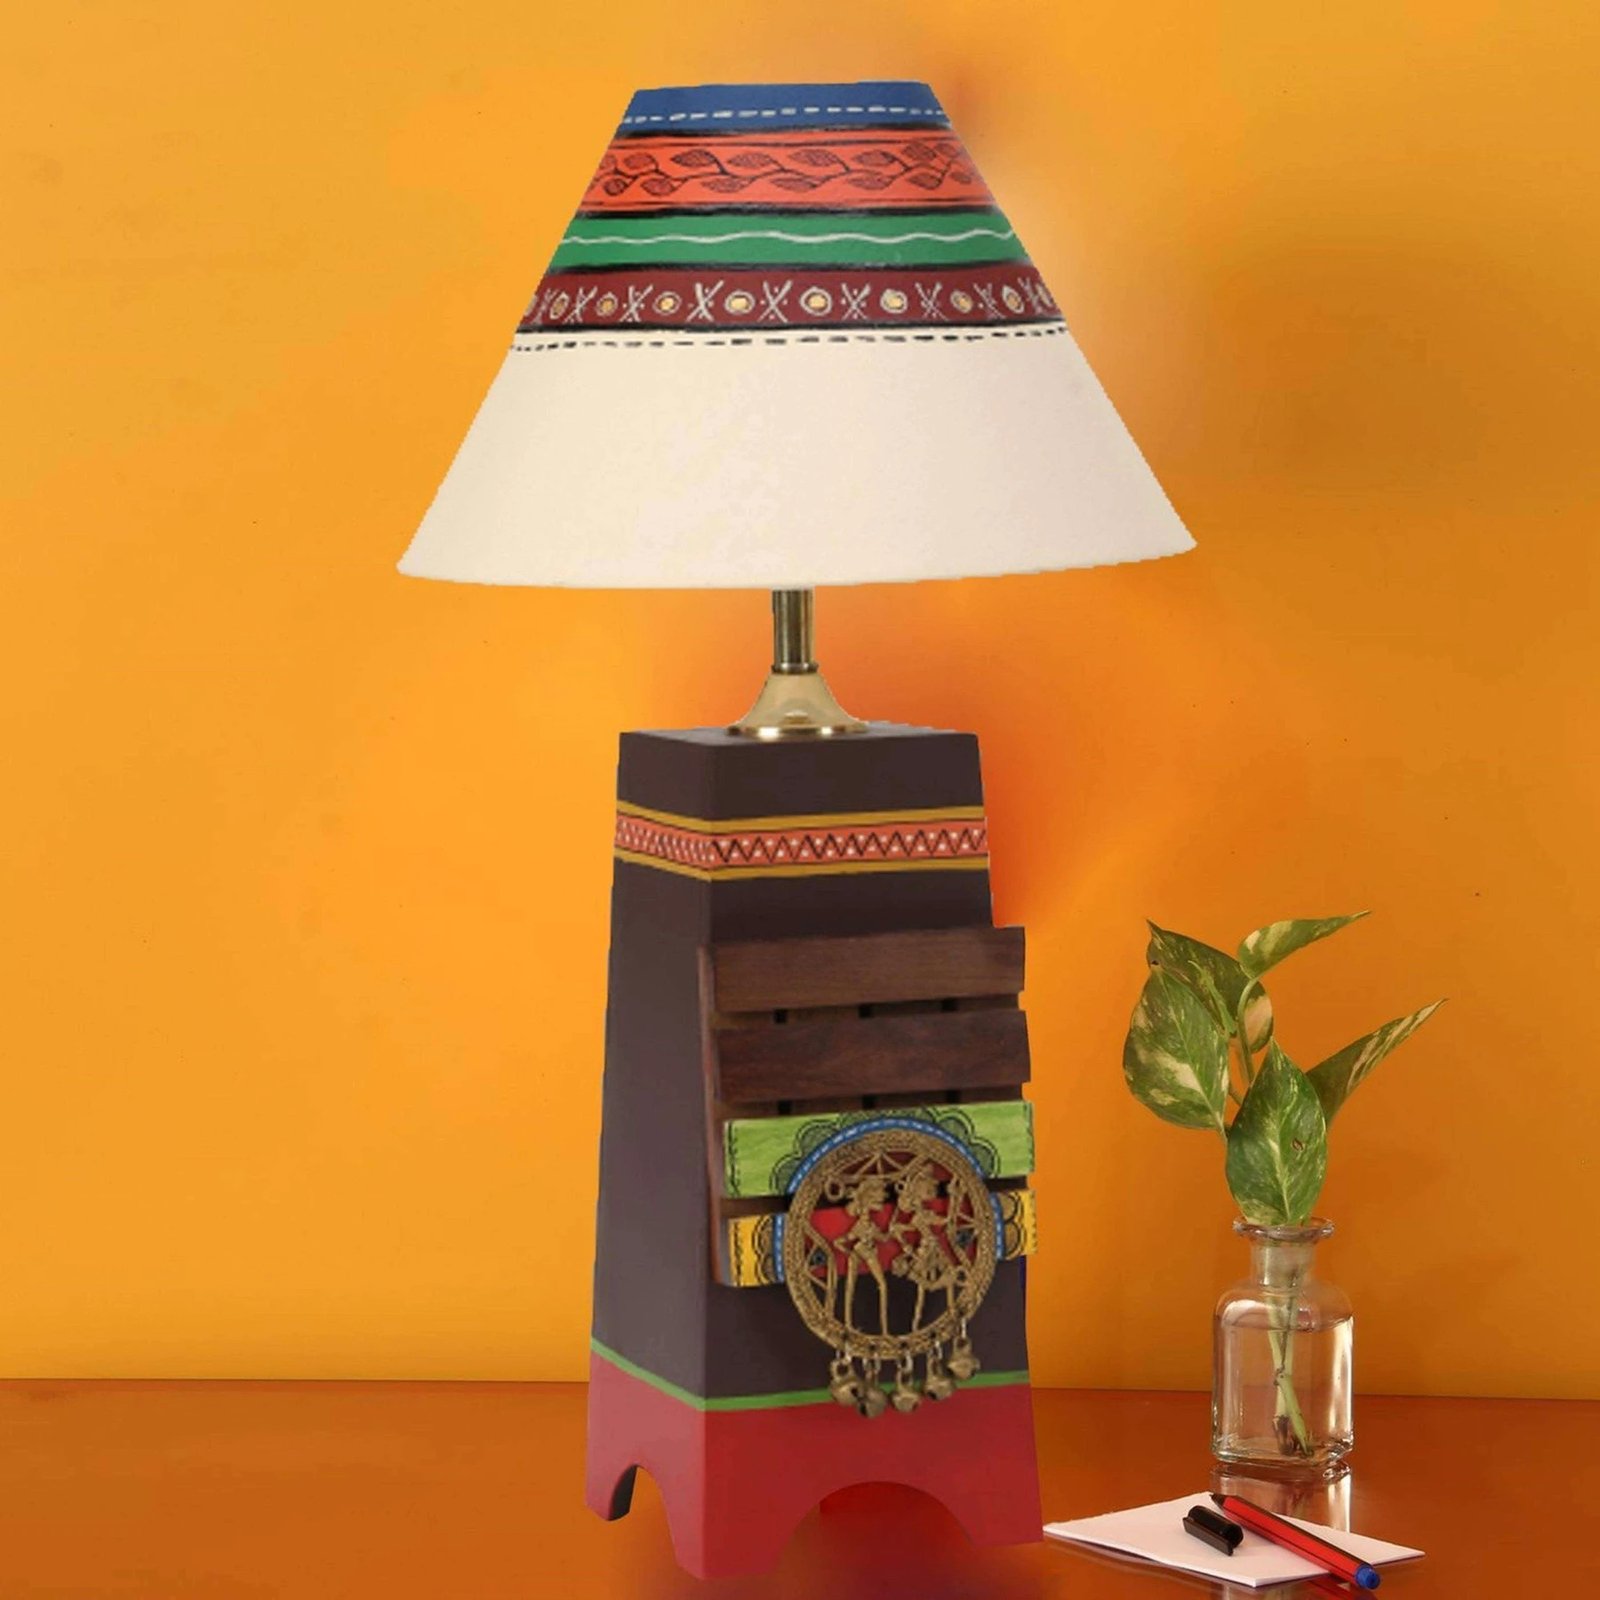 Wooden Decorative-Bedroom-Study Table Lamp